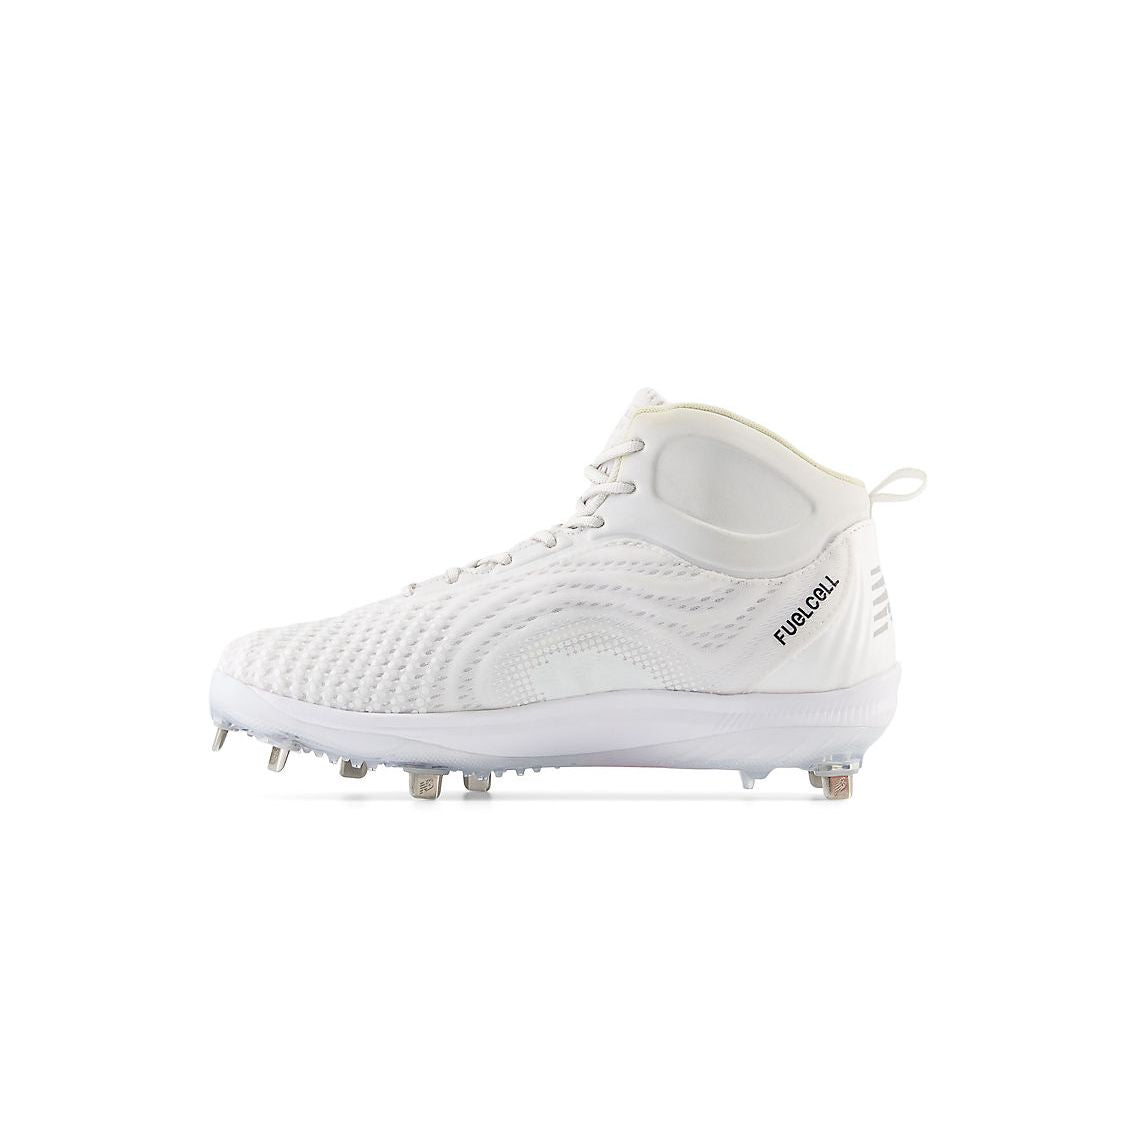 New Balance Men's FuelCell 4040 V7 Mid-Metal Baseball Cleats - White / Rain Cloud - M4040TW7